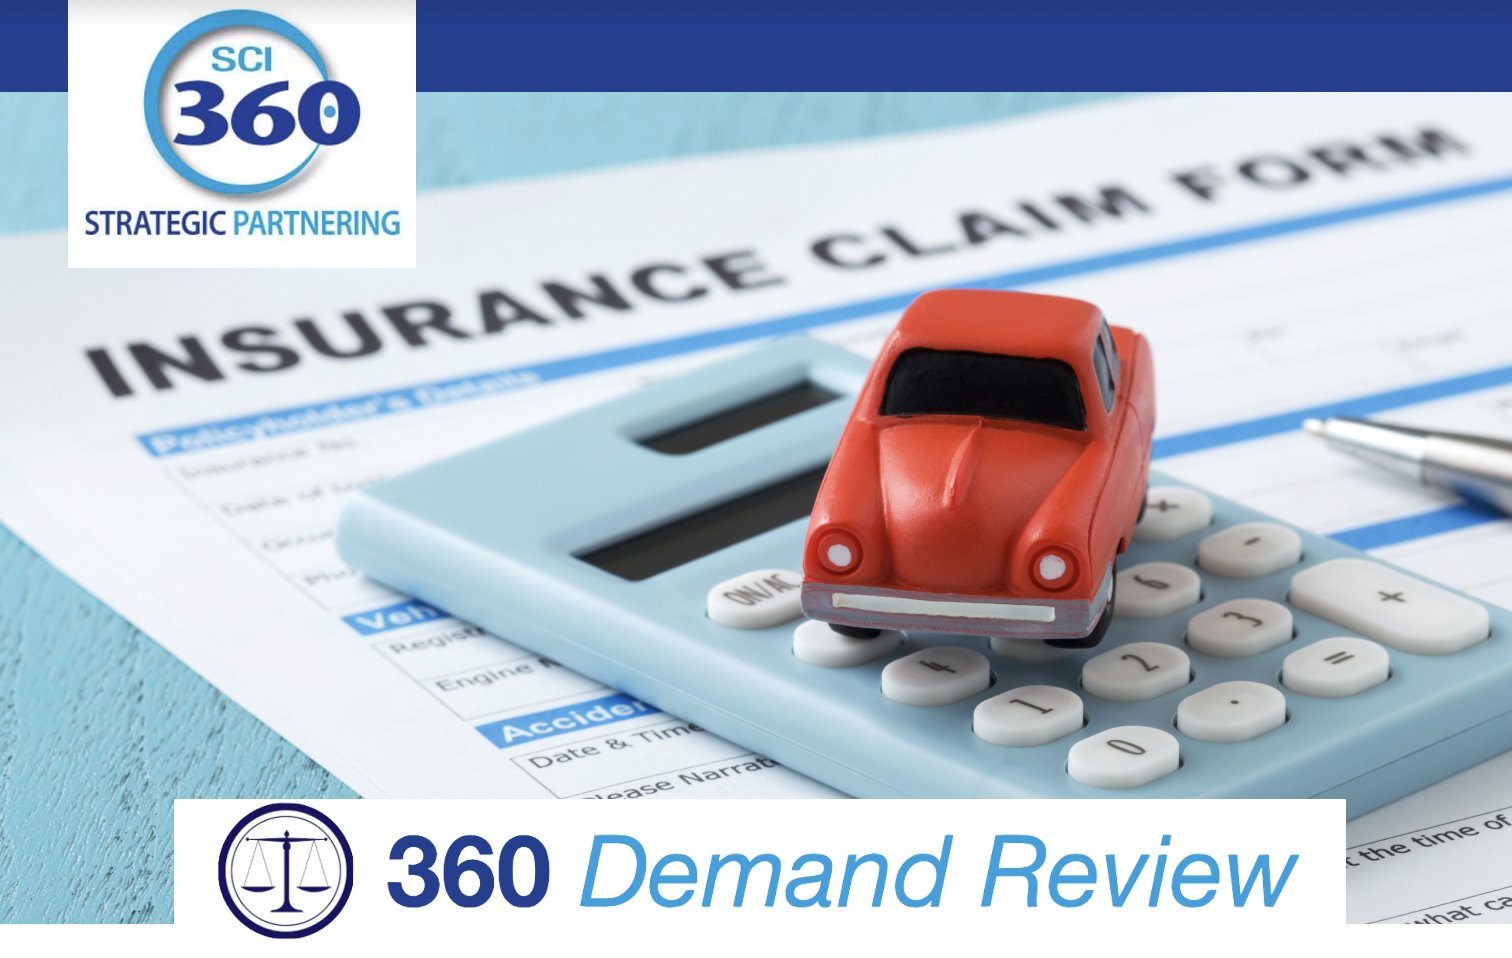 Fred Loya Insurance Company Uses SCI 360's 360 DEMAND Review App to Automate Claims Processing, Significantly Reducing Processing Times, and Reducing Exposure by $3.8M a Year thumbnail